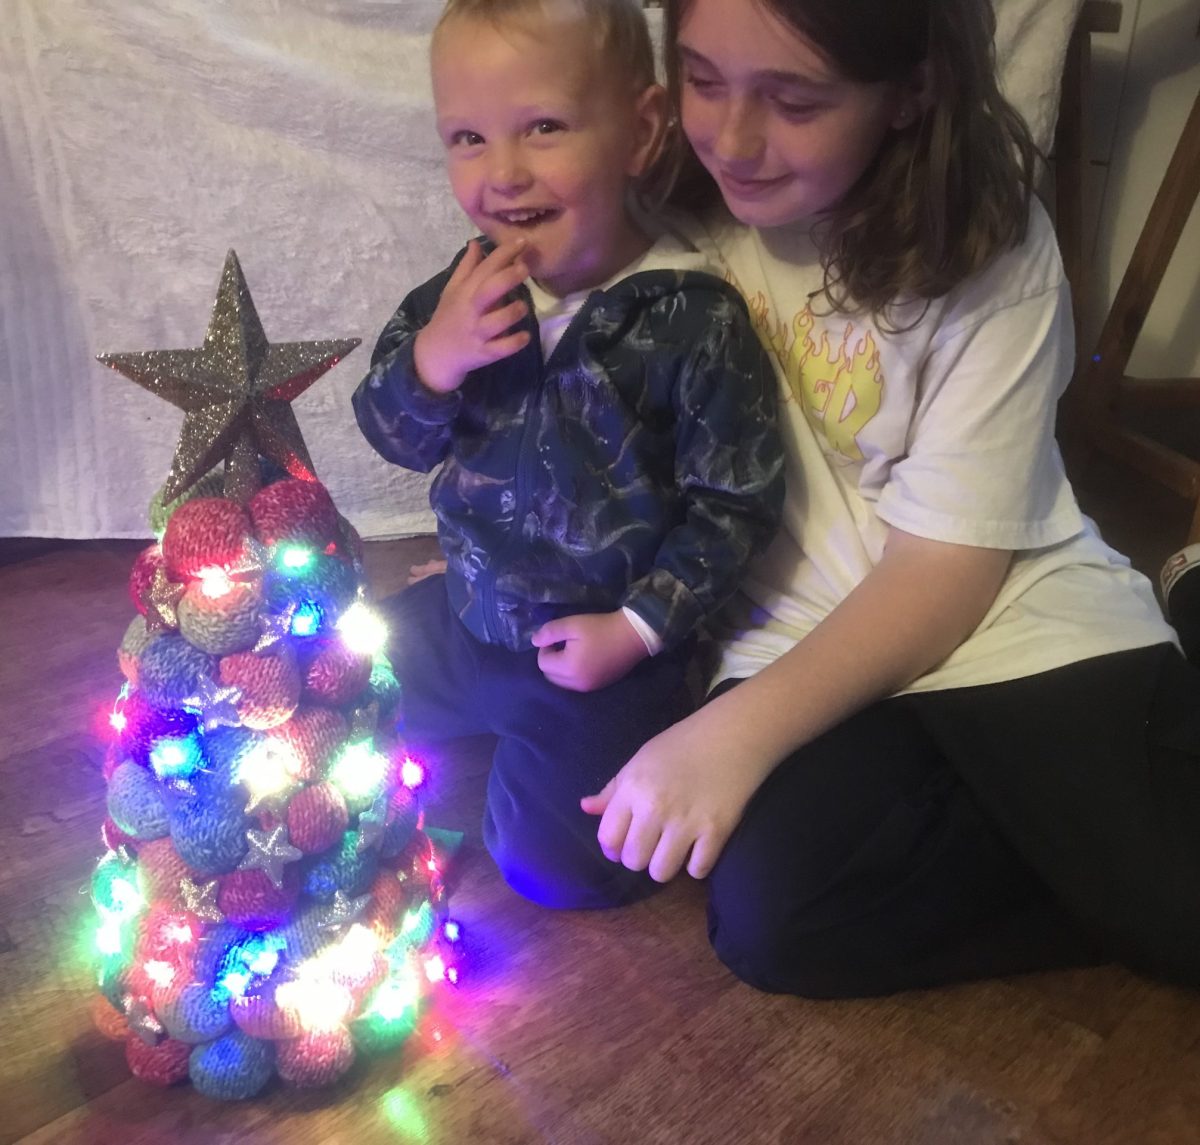 Two boys looking at a knitted, lit-up Christmas tree.